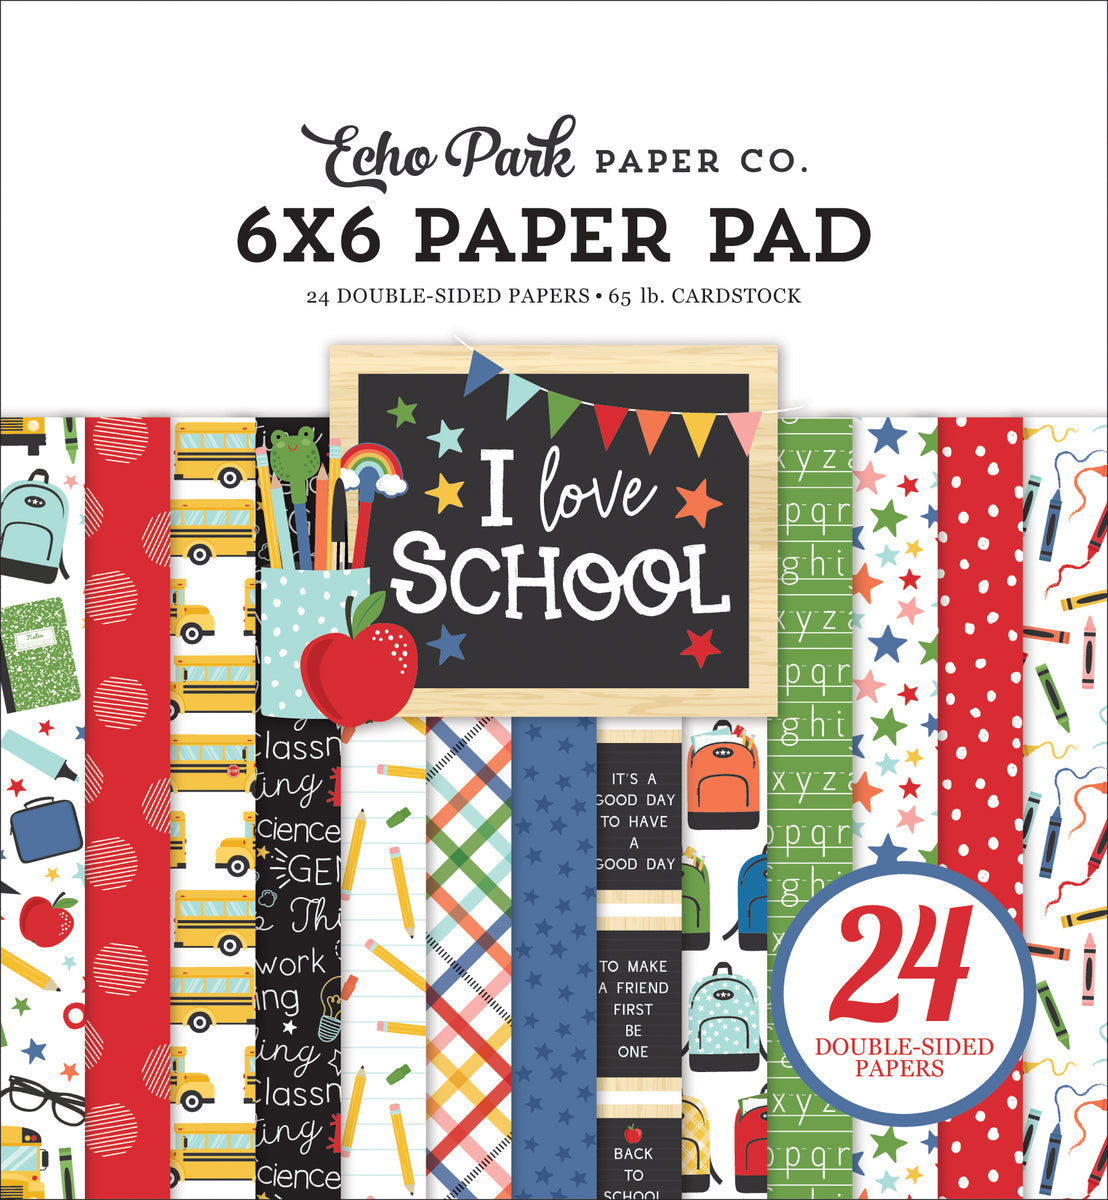 I Love School 6x6 patterned paper pad from Echo Park Paper